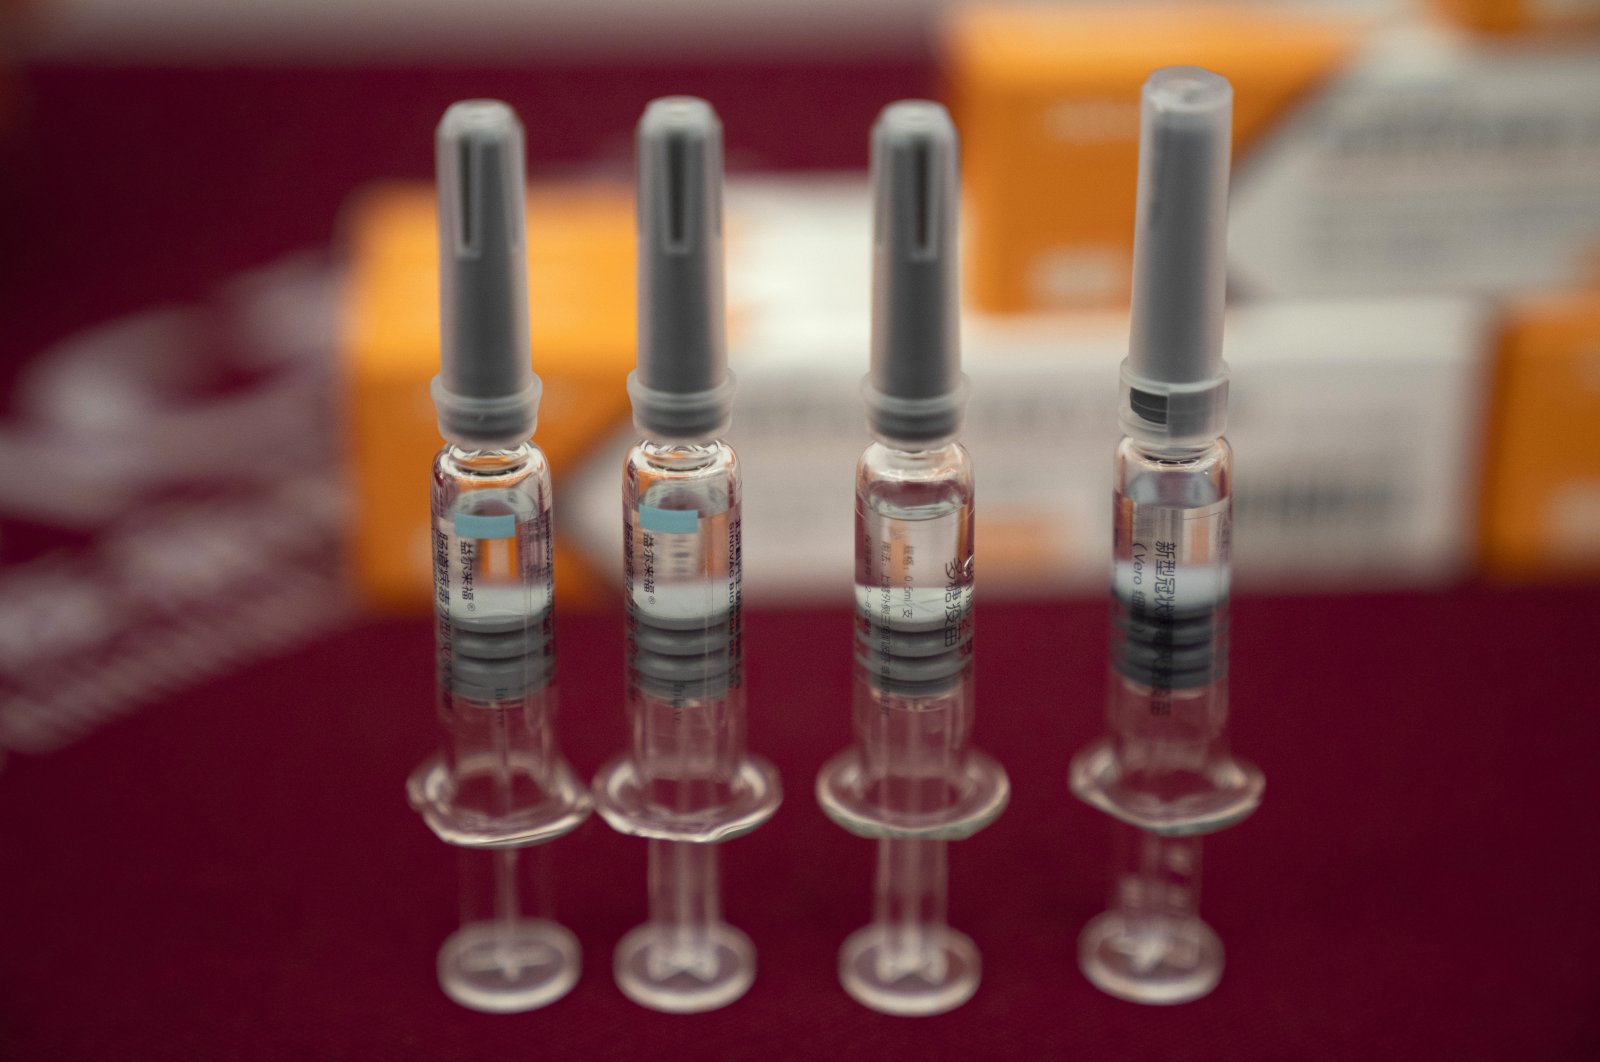 Syringes of SARS CoV-2 Vaccine for COVID-19 produced by SinoVac are displayed during a media tour of its factory in Beijing on Thursday, Sept. 24, 2020. (AP Photo)